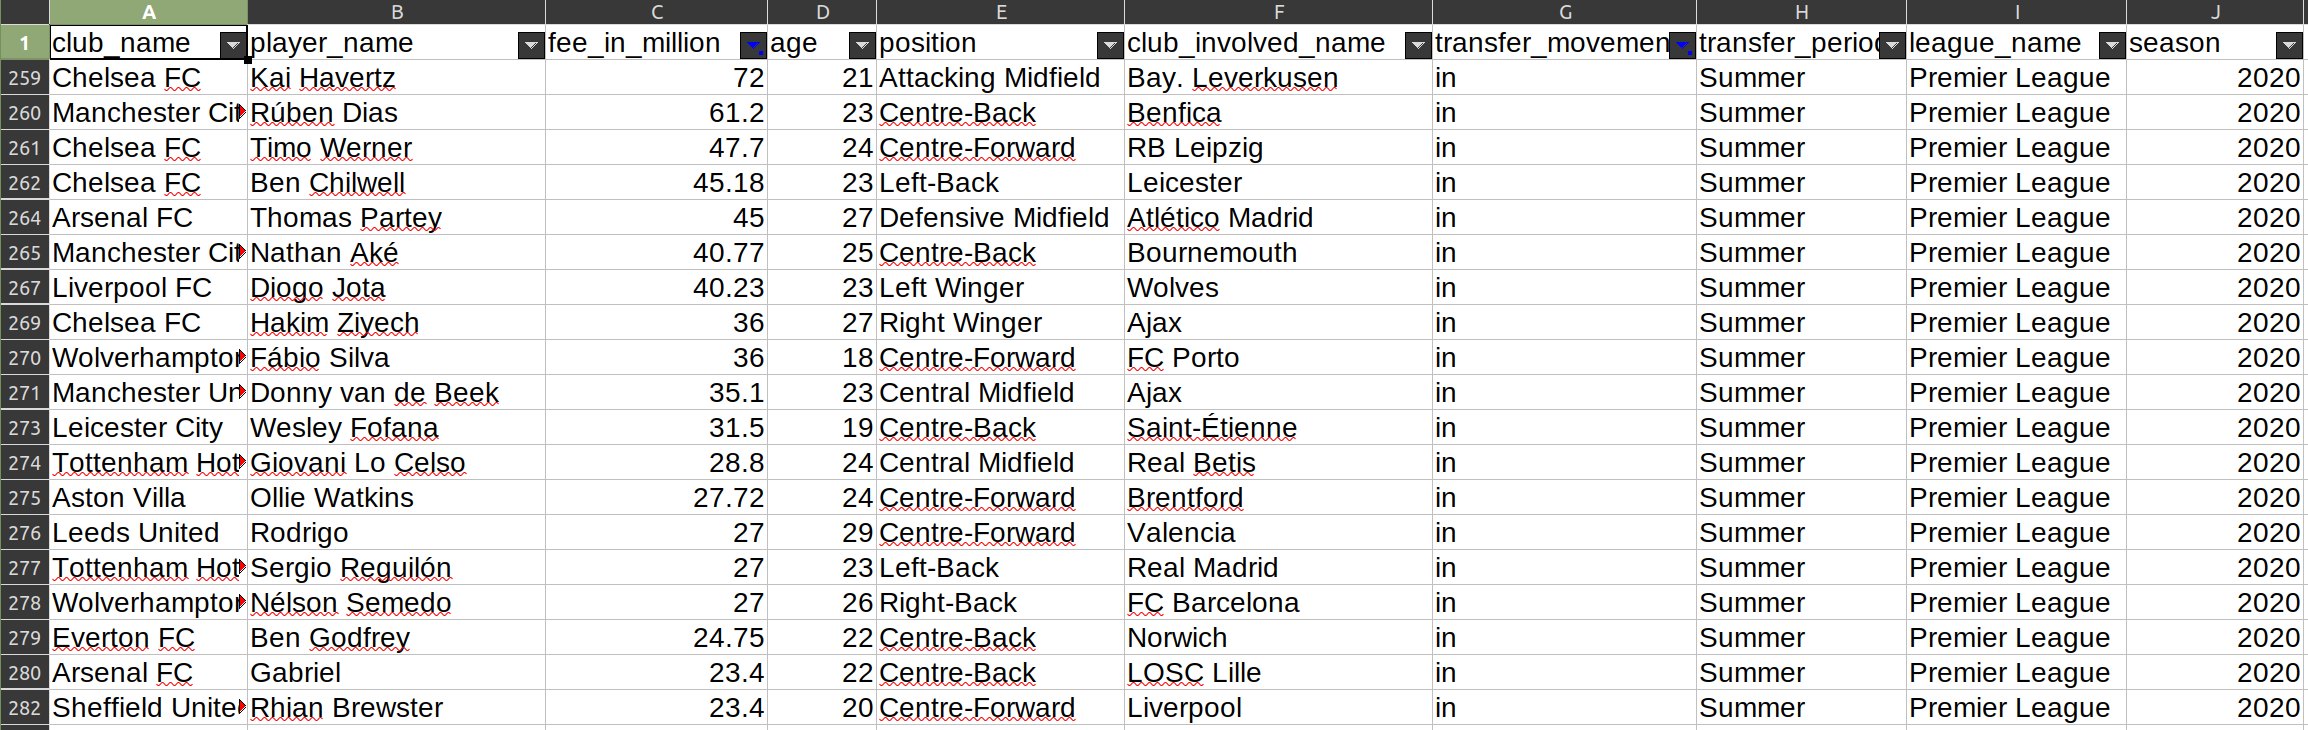 A sorted spreadsheet with information about player transfers